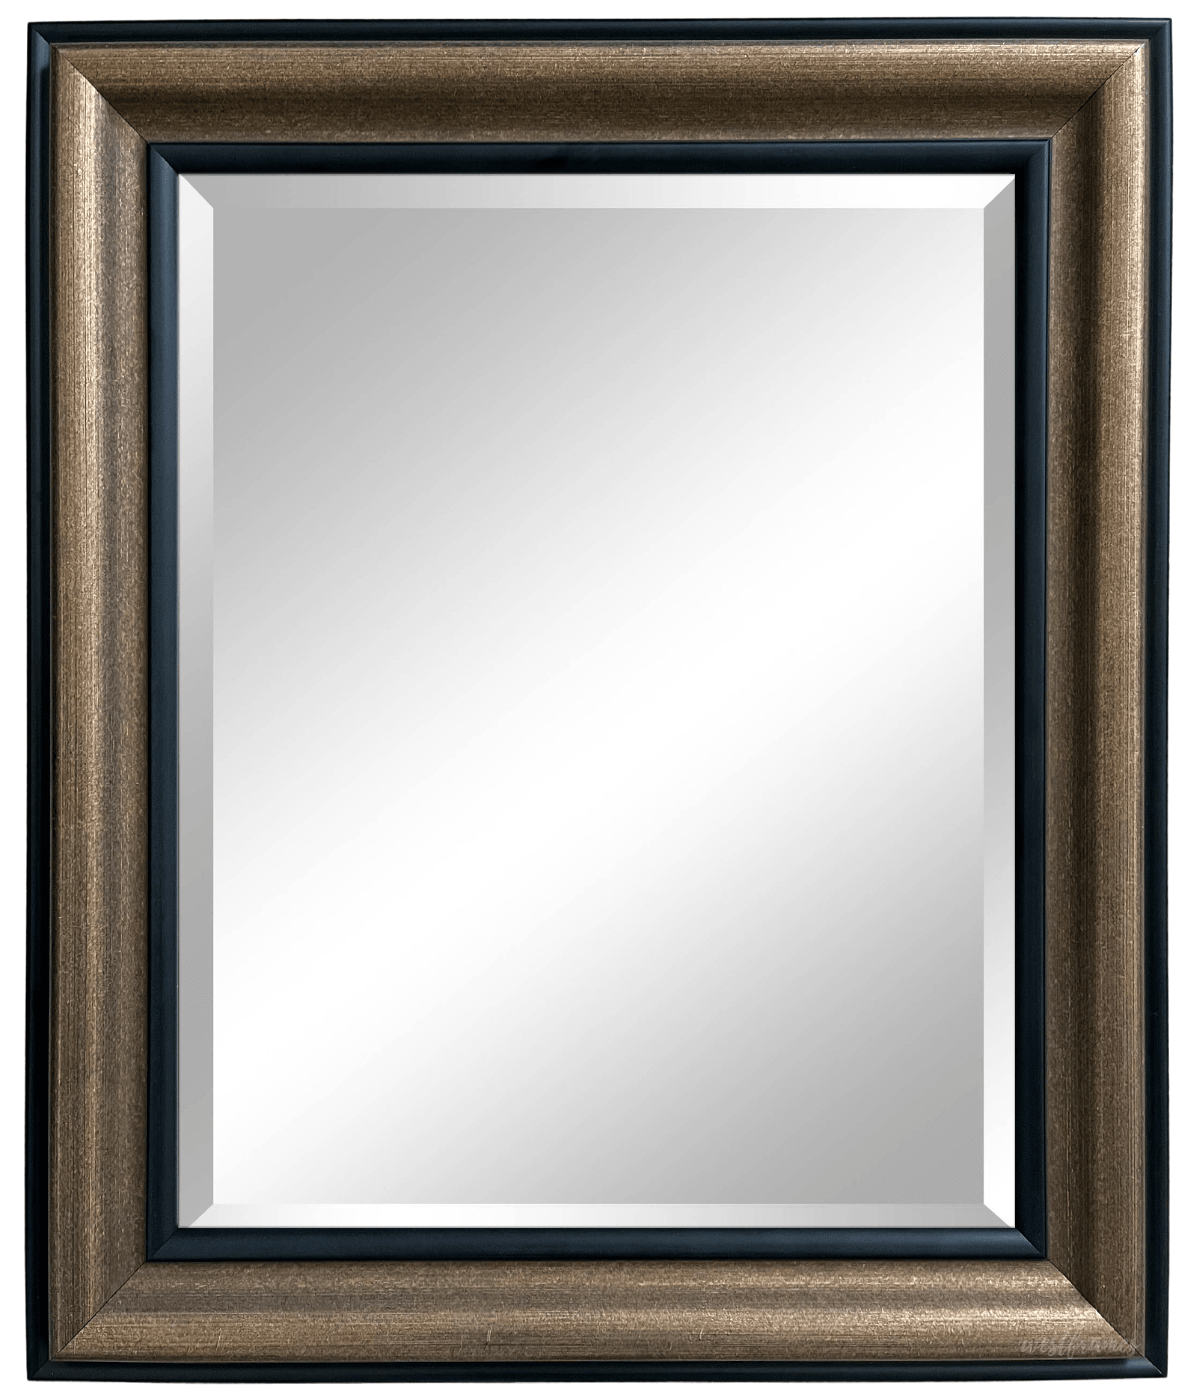 Vienna Rustic Vintage Gold Black Trim Finish Traditional Style Wood Framed Wall Mirror 3" - West Frames